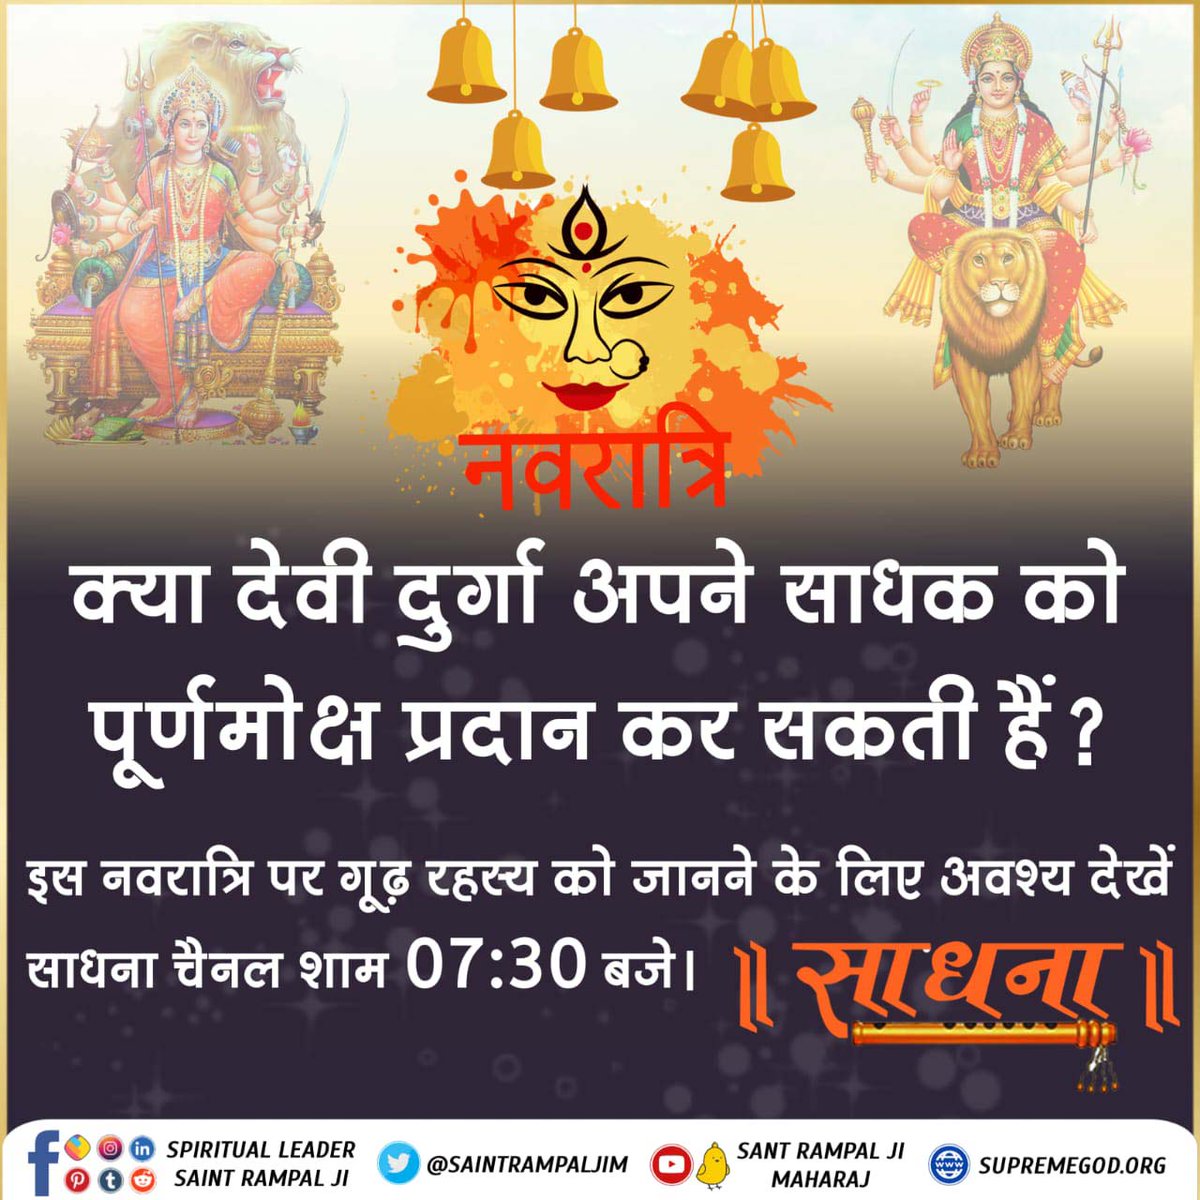 #भूखेबच्चेदेख_मां_कैसे_खुश_हो People who are unaware about the ultimate Spiritual Knowledge worship Goddess Durga. But our Holy Scriptures like Vedas and Shrimad Bhagwat Gita suggest worshiping Almighty God Kabir Saheb.